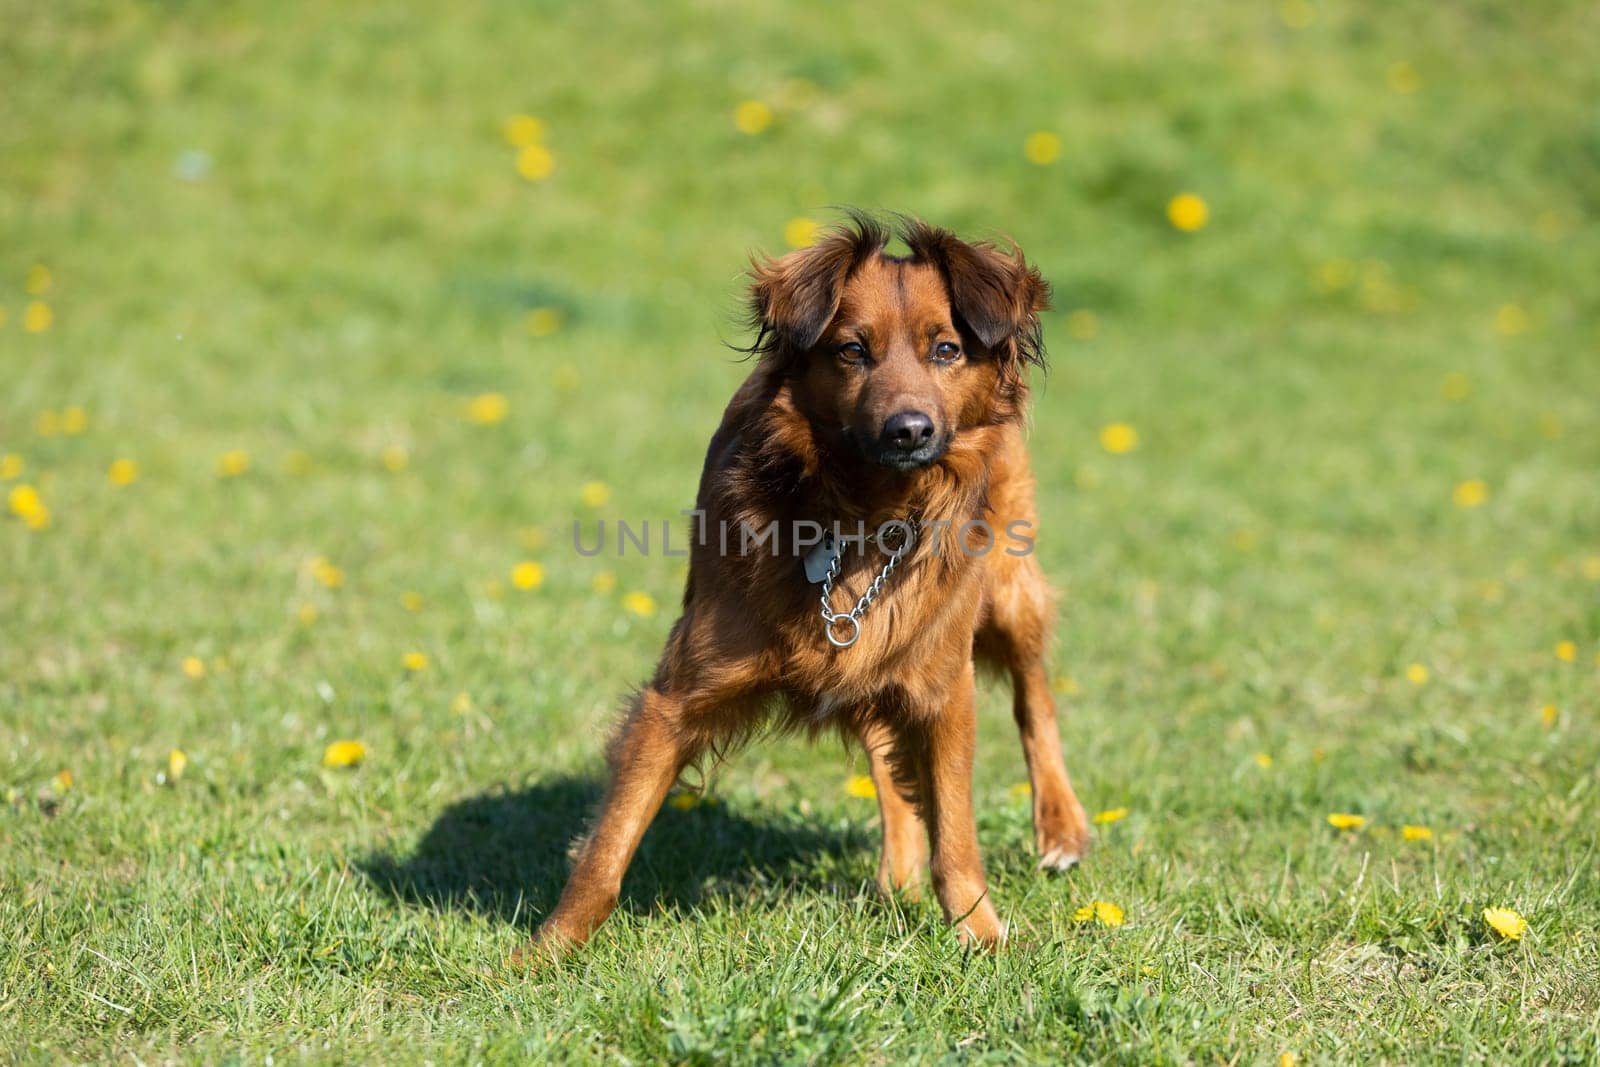 The mixed-breed dog stands uncertain on the green lawn and looks intensely.